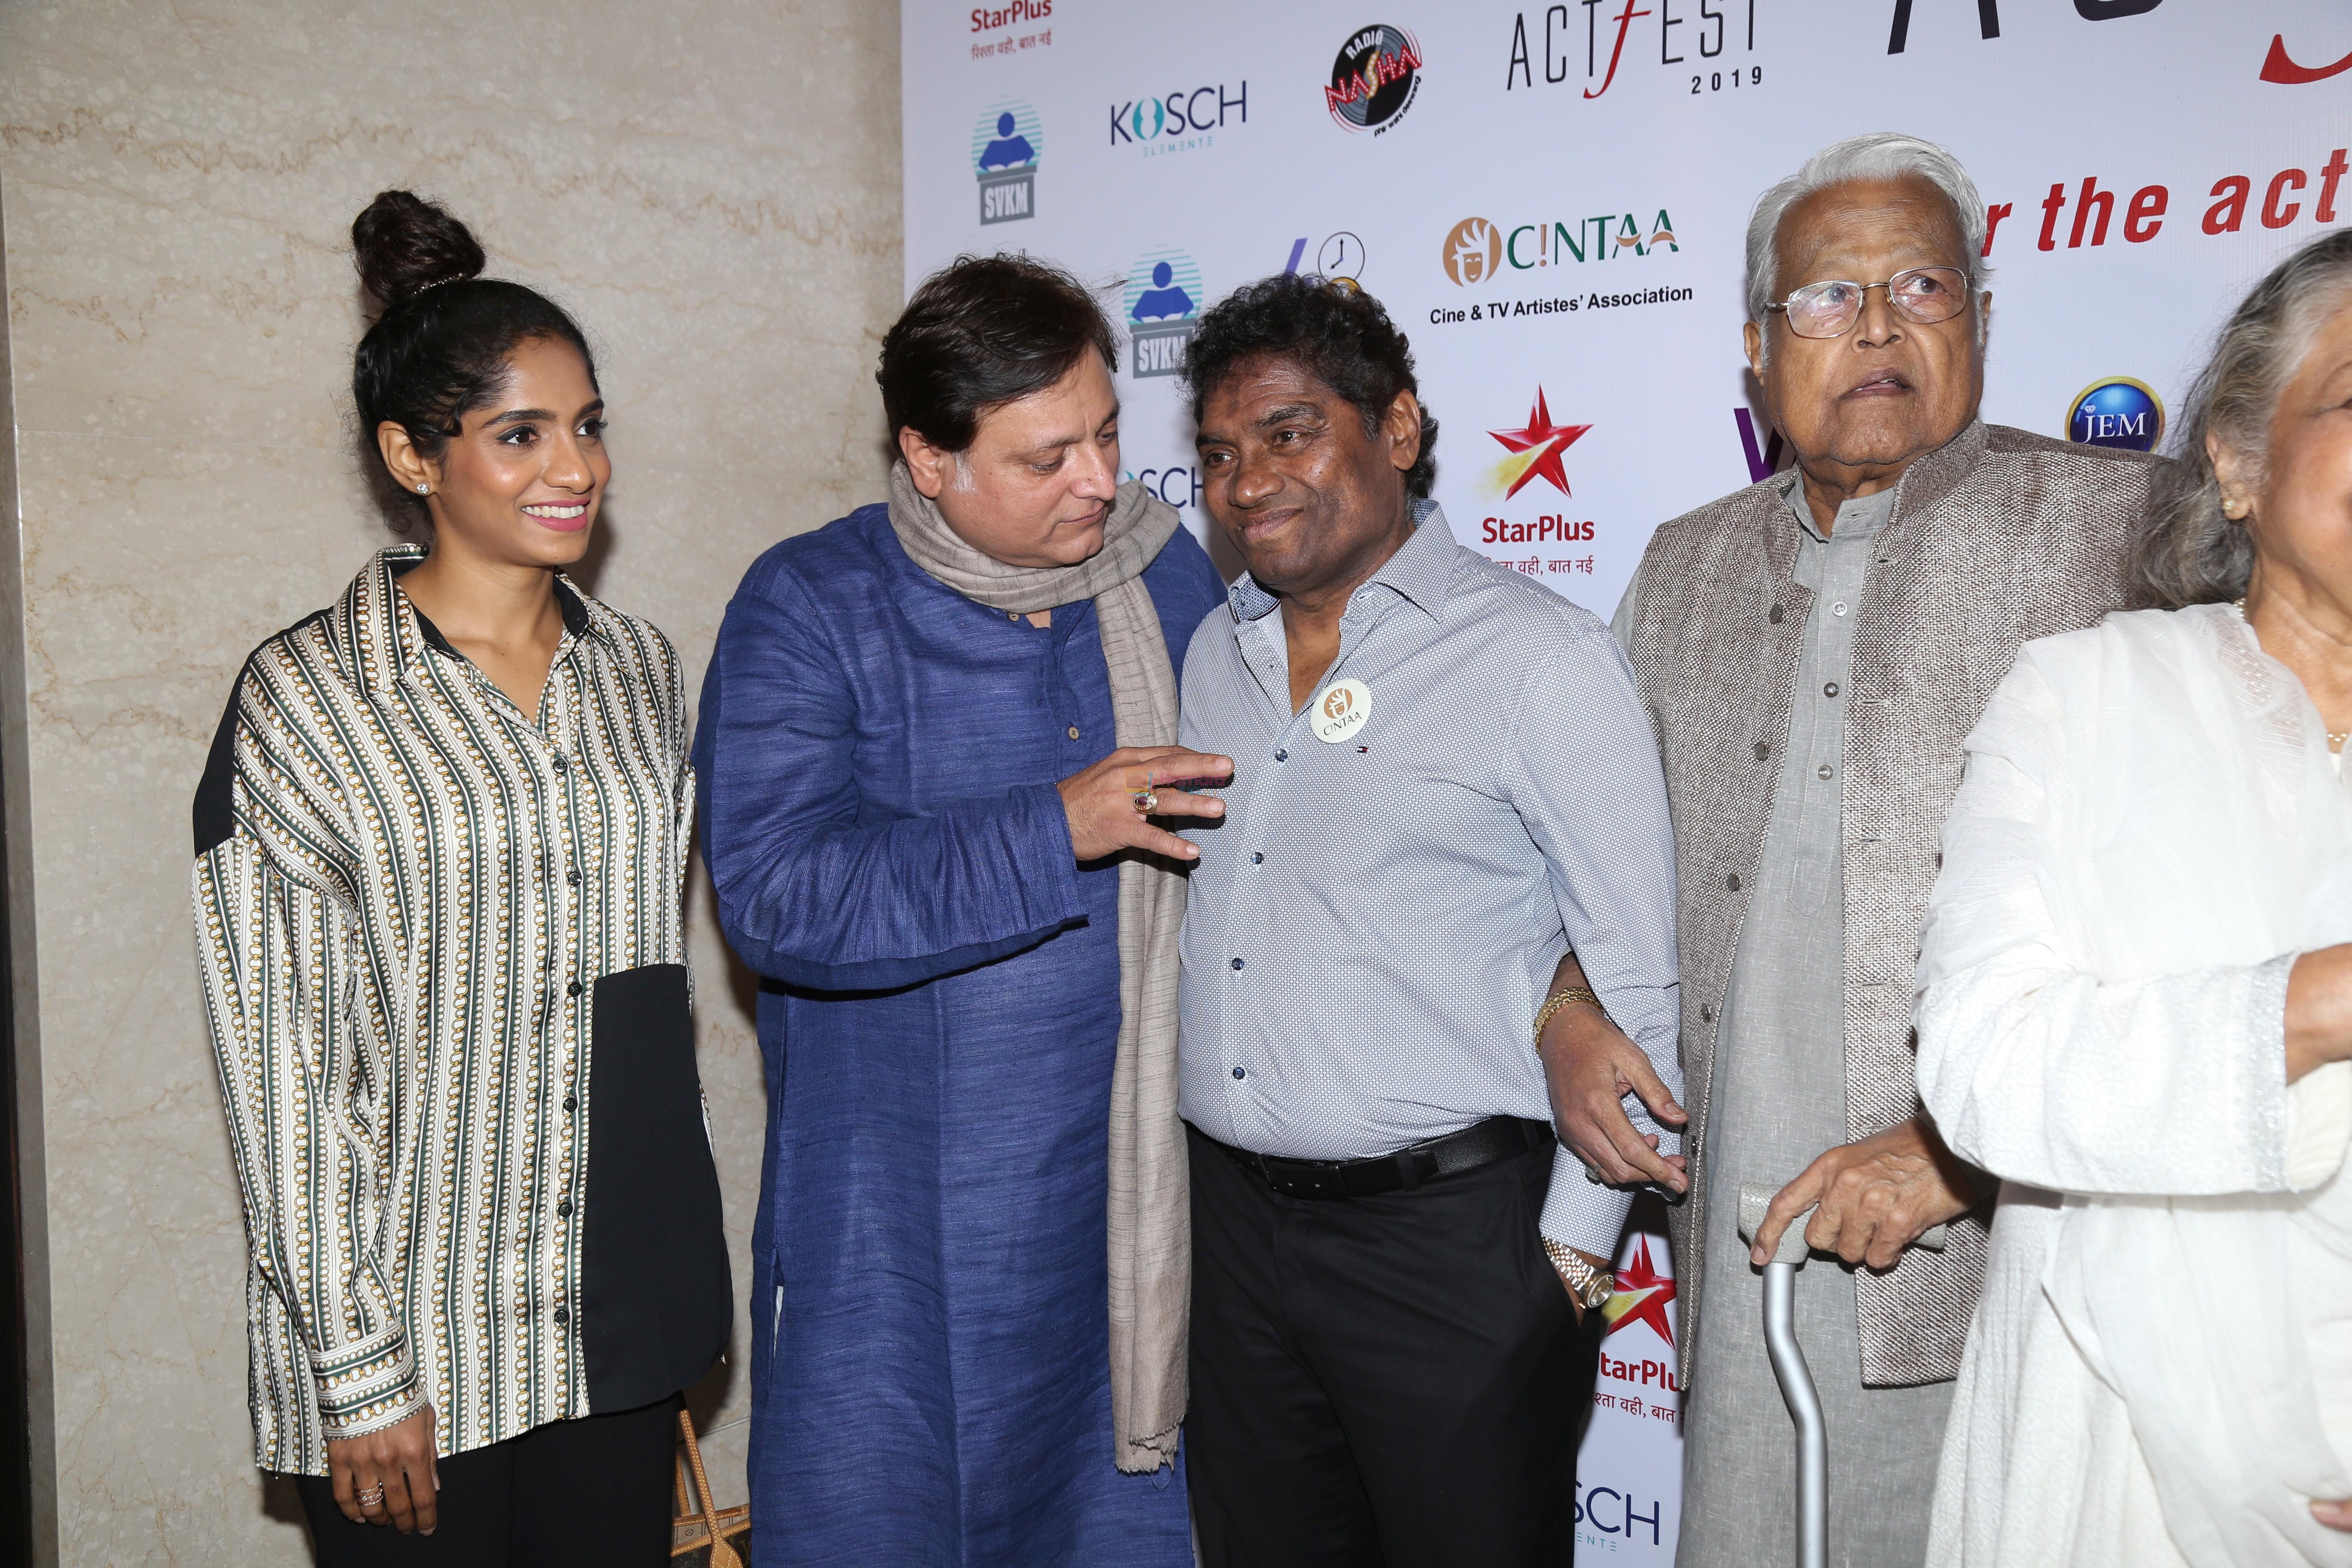 Manoj Joshi, Johnny Lever at the Cintaa 48hours film project's actfest at Mithibai College in vile Parle on 17th Feb 2019